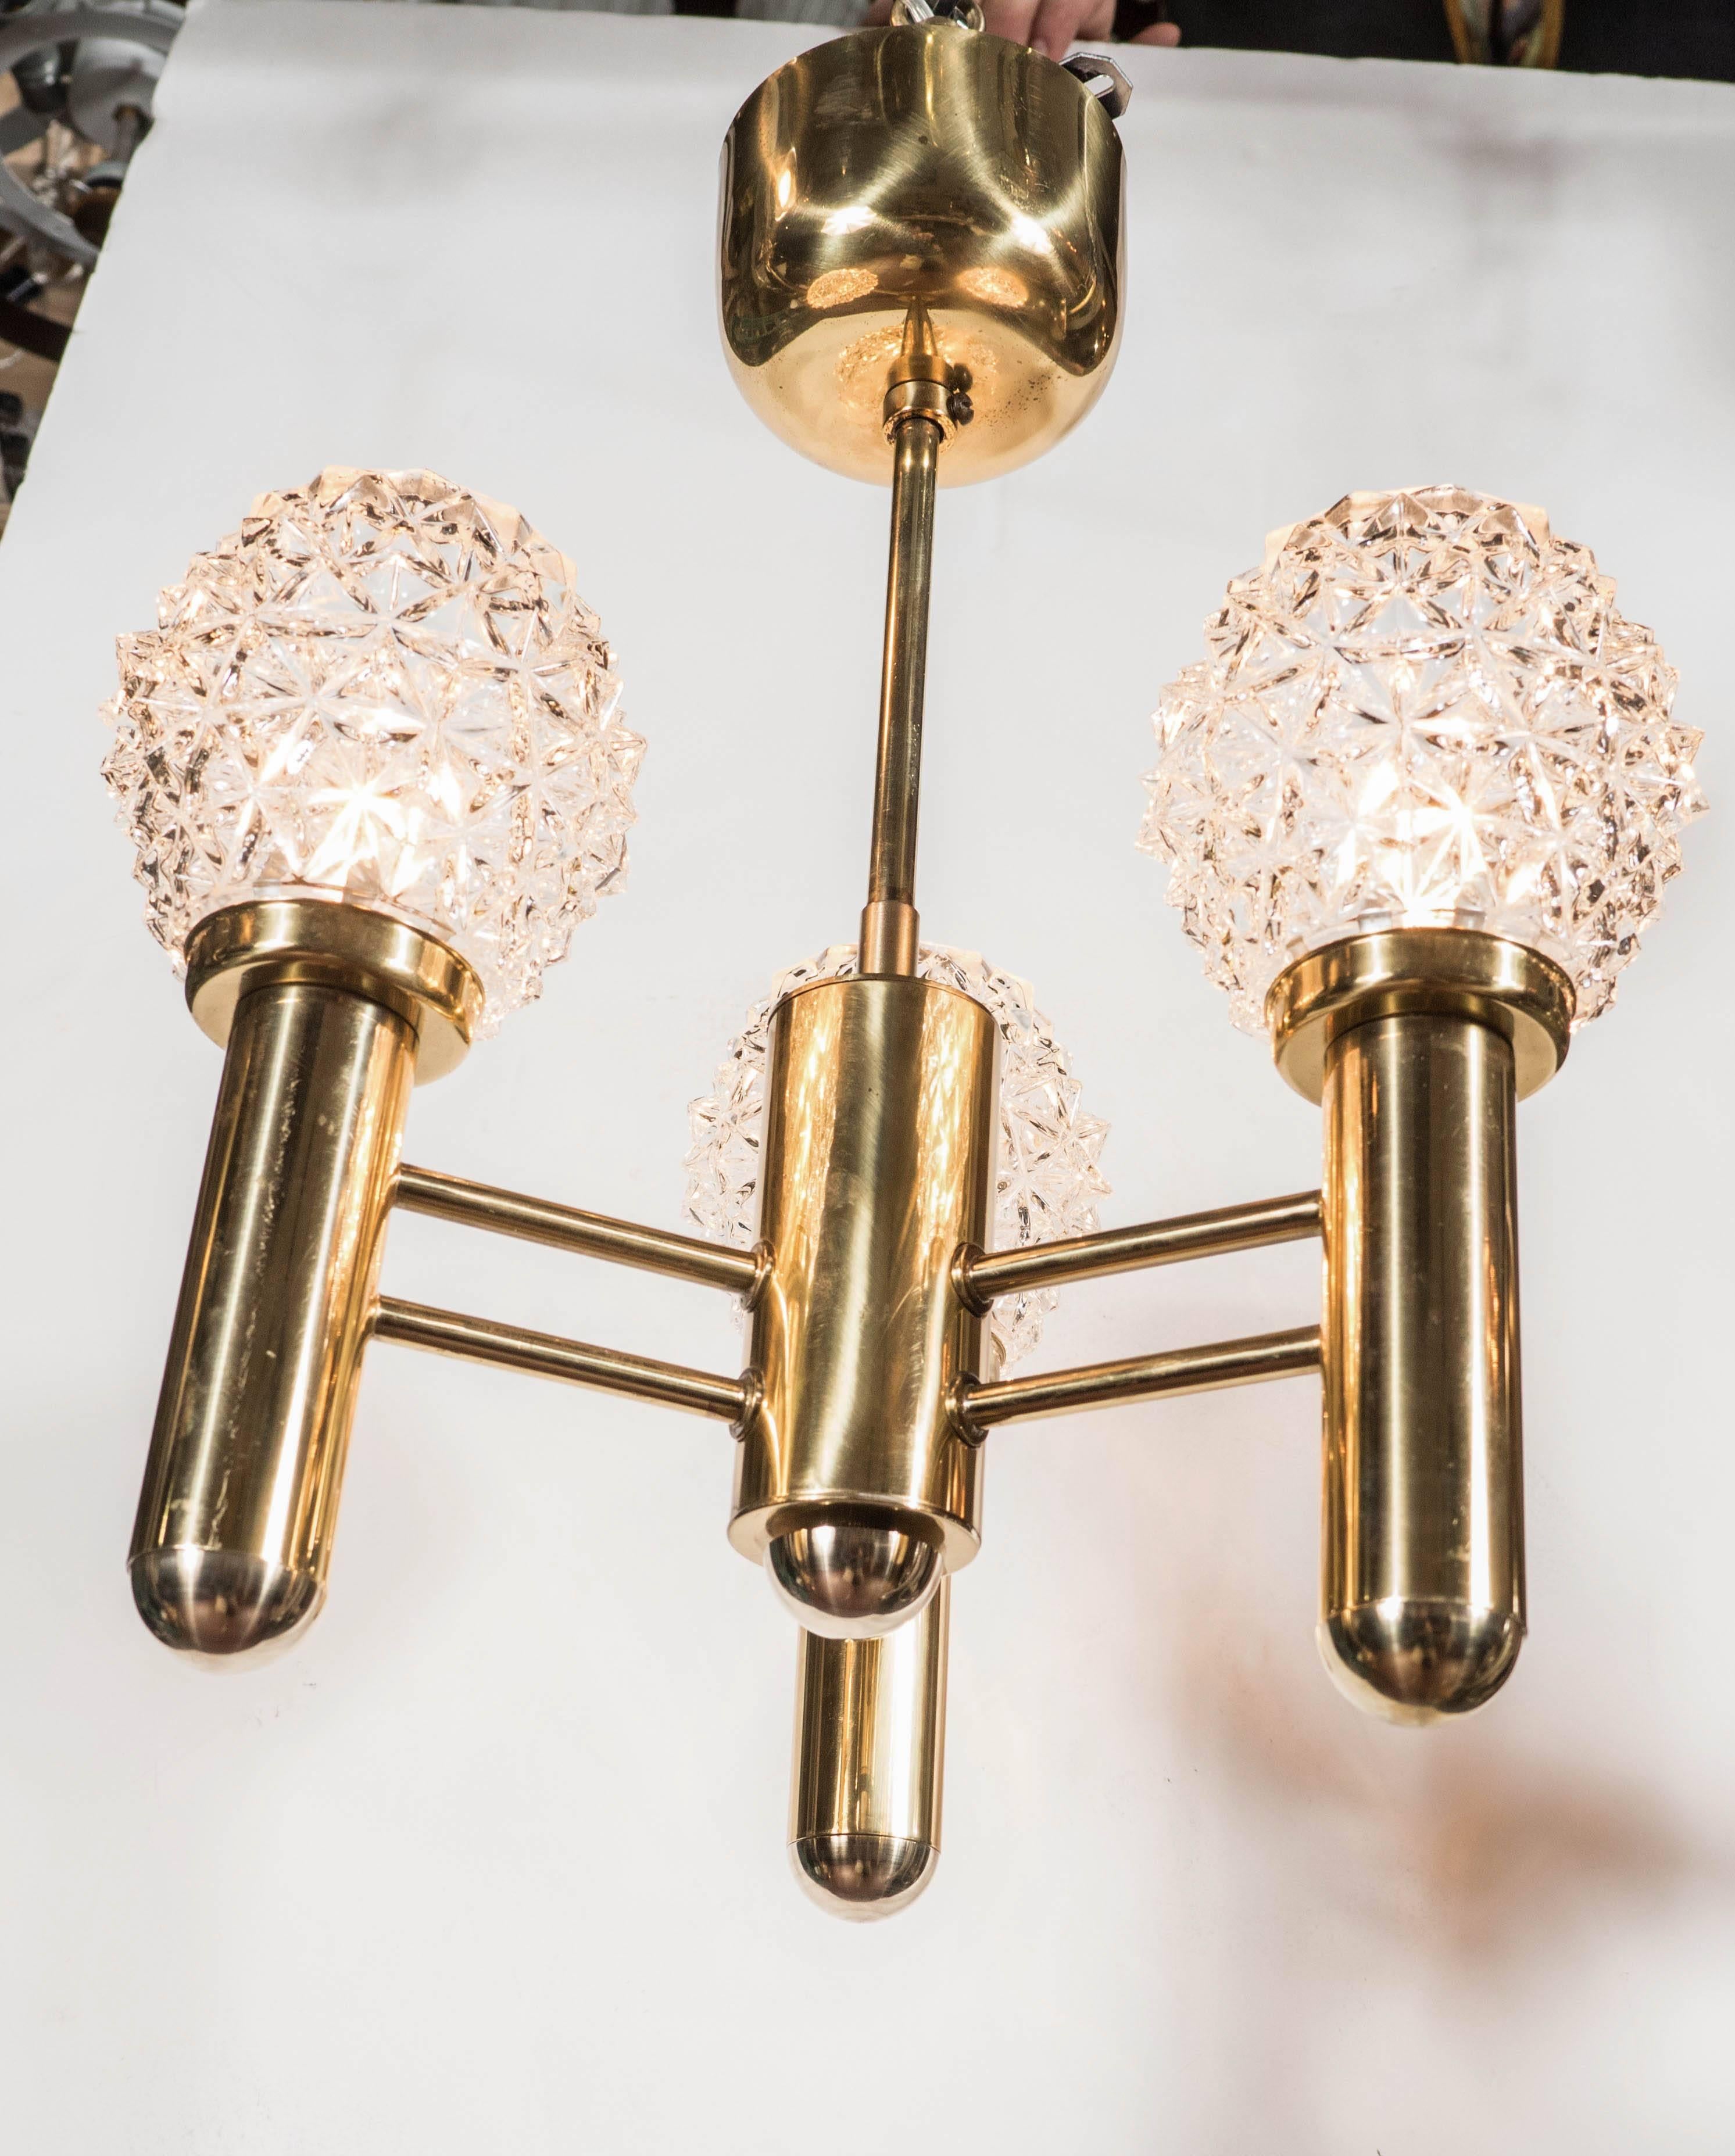 German Sophisticated Three-Arm Chandelier in Brass with Crystal Shades by Richard Essig